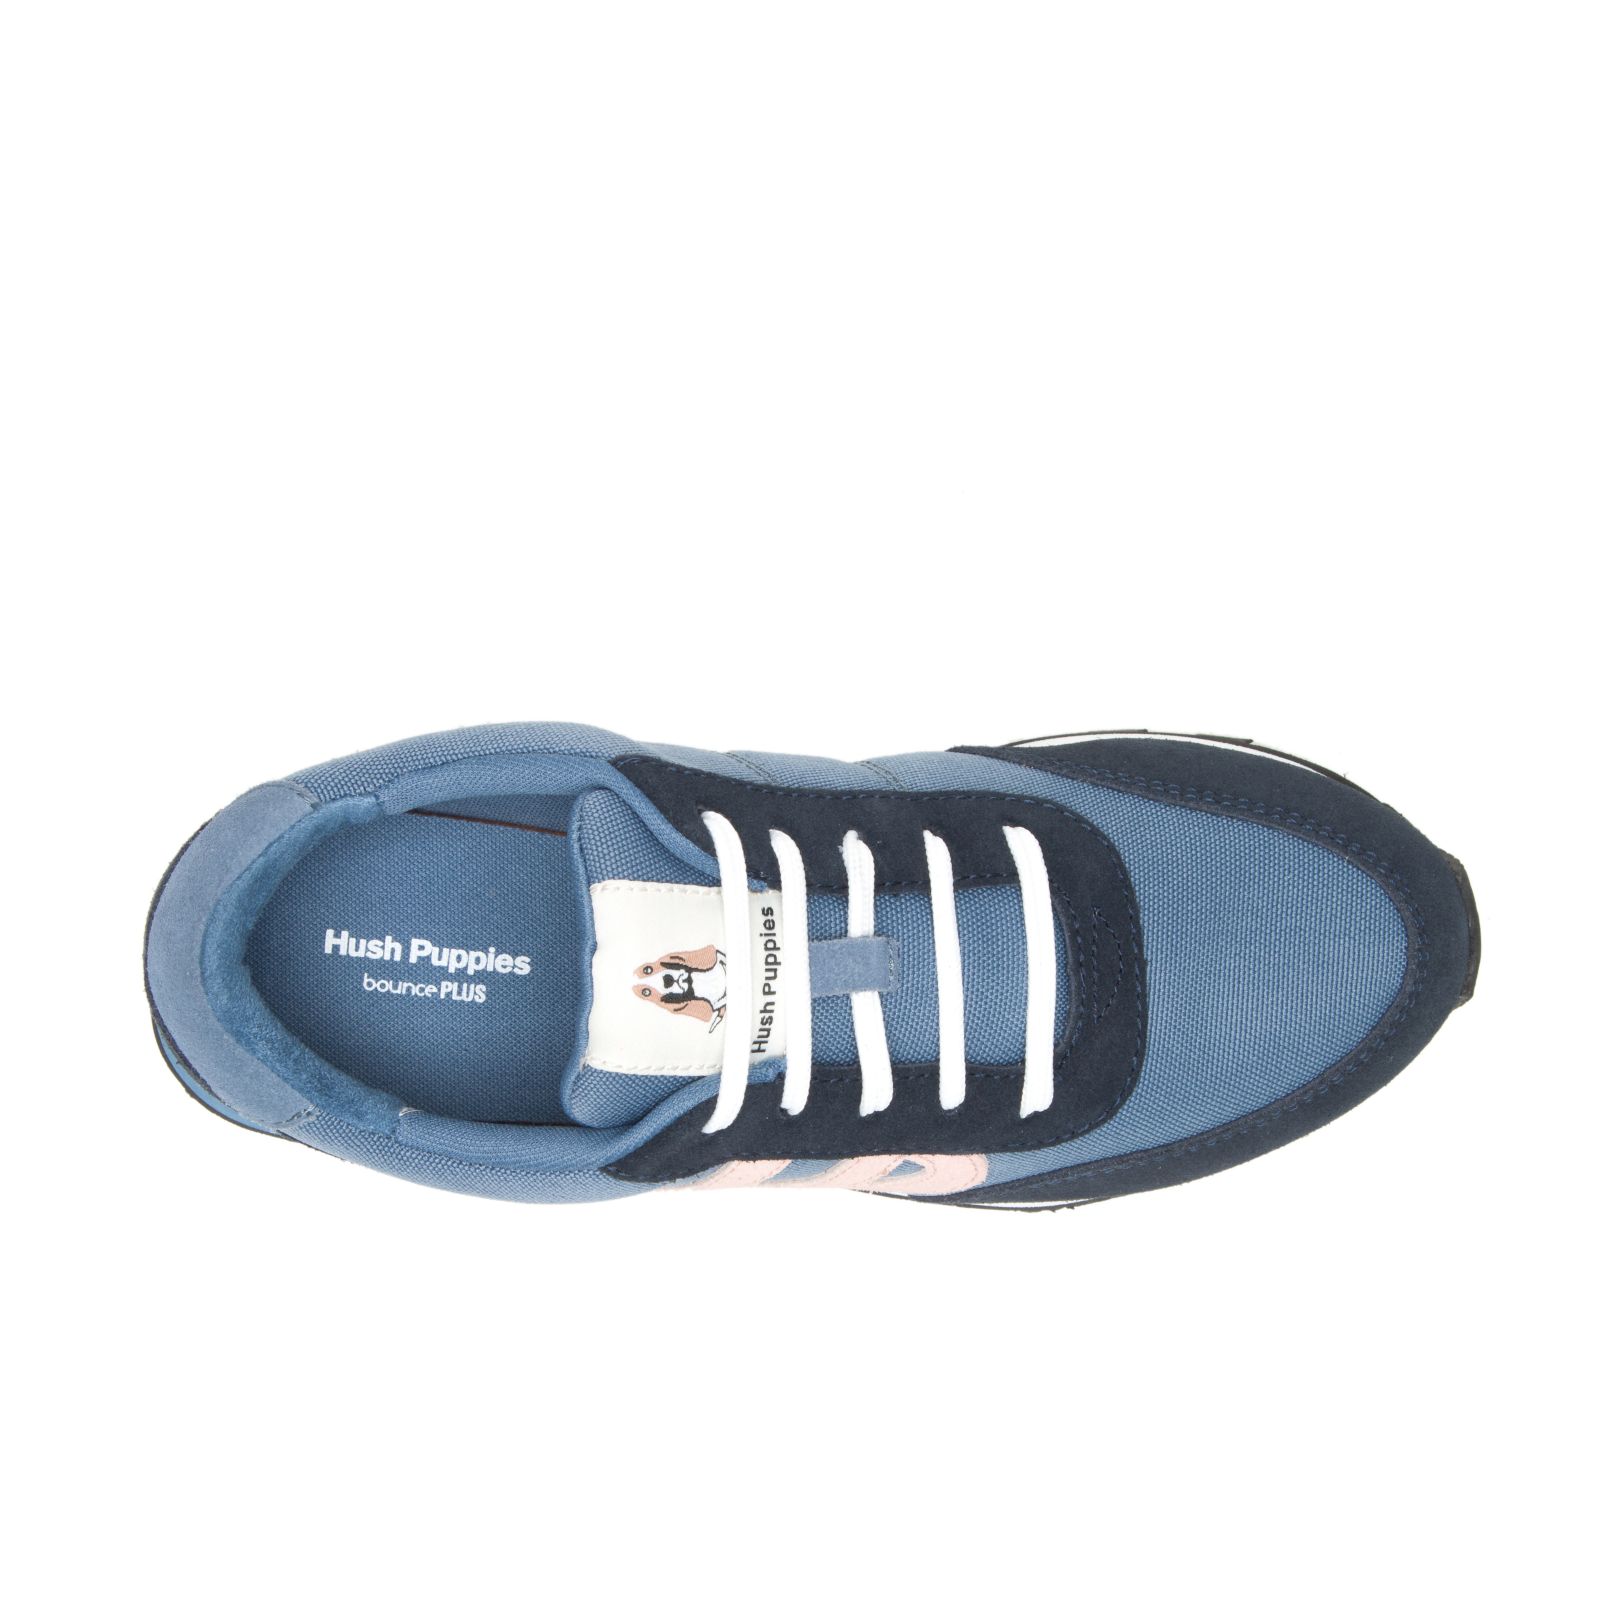 Tenis Hush Puppies Seventy8 Mujer Cool Blues Suede | ZKQPJOR-06